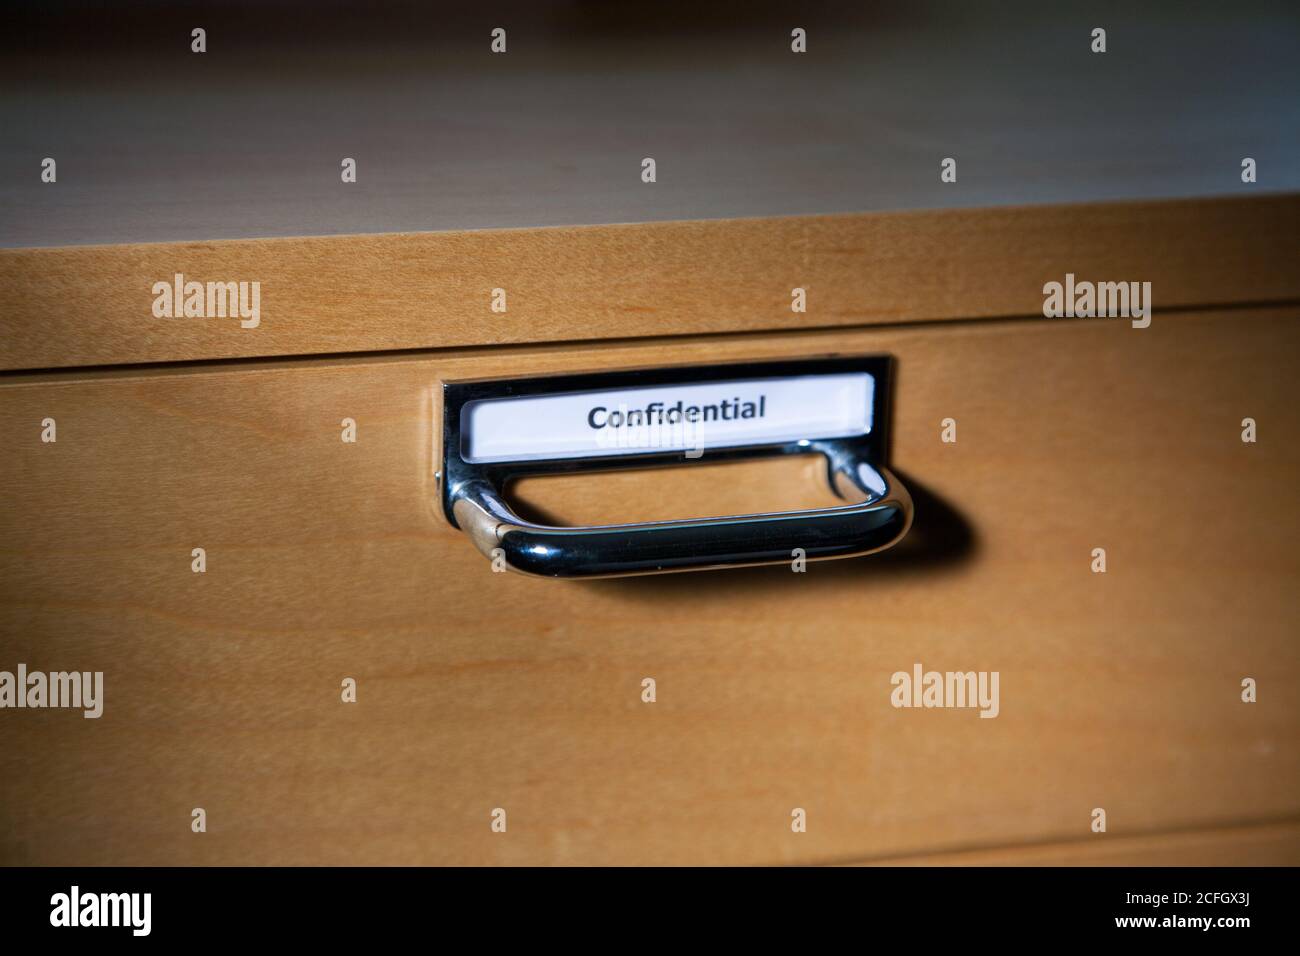 Wooden filing Drawer closed with Confidential sign Stock Photo